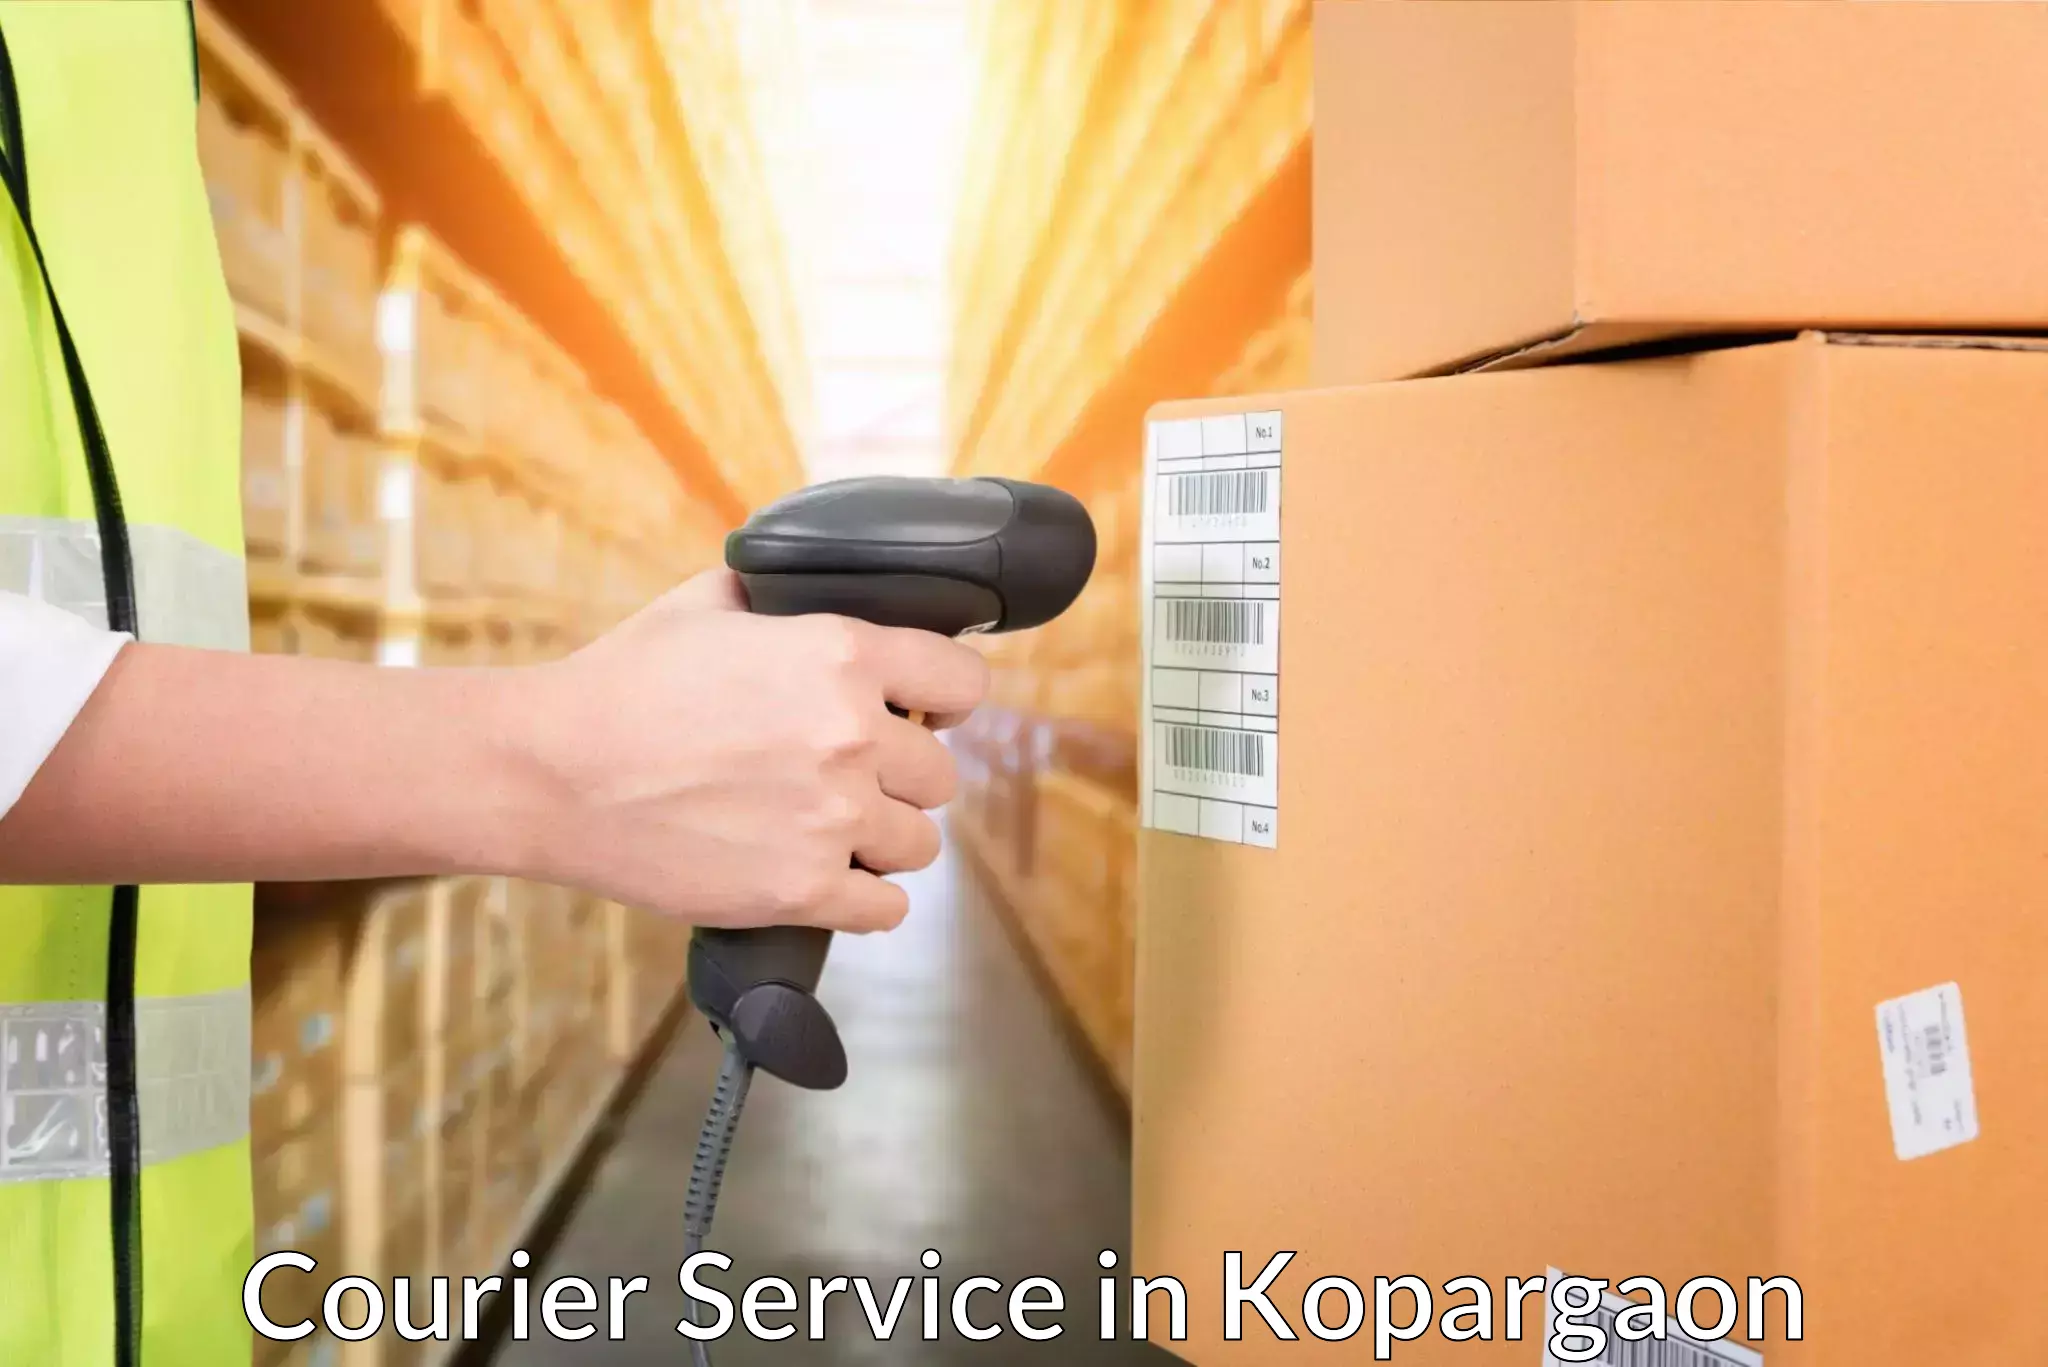 Fast shipping solutions in Kopargaon